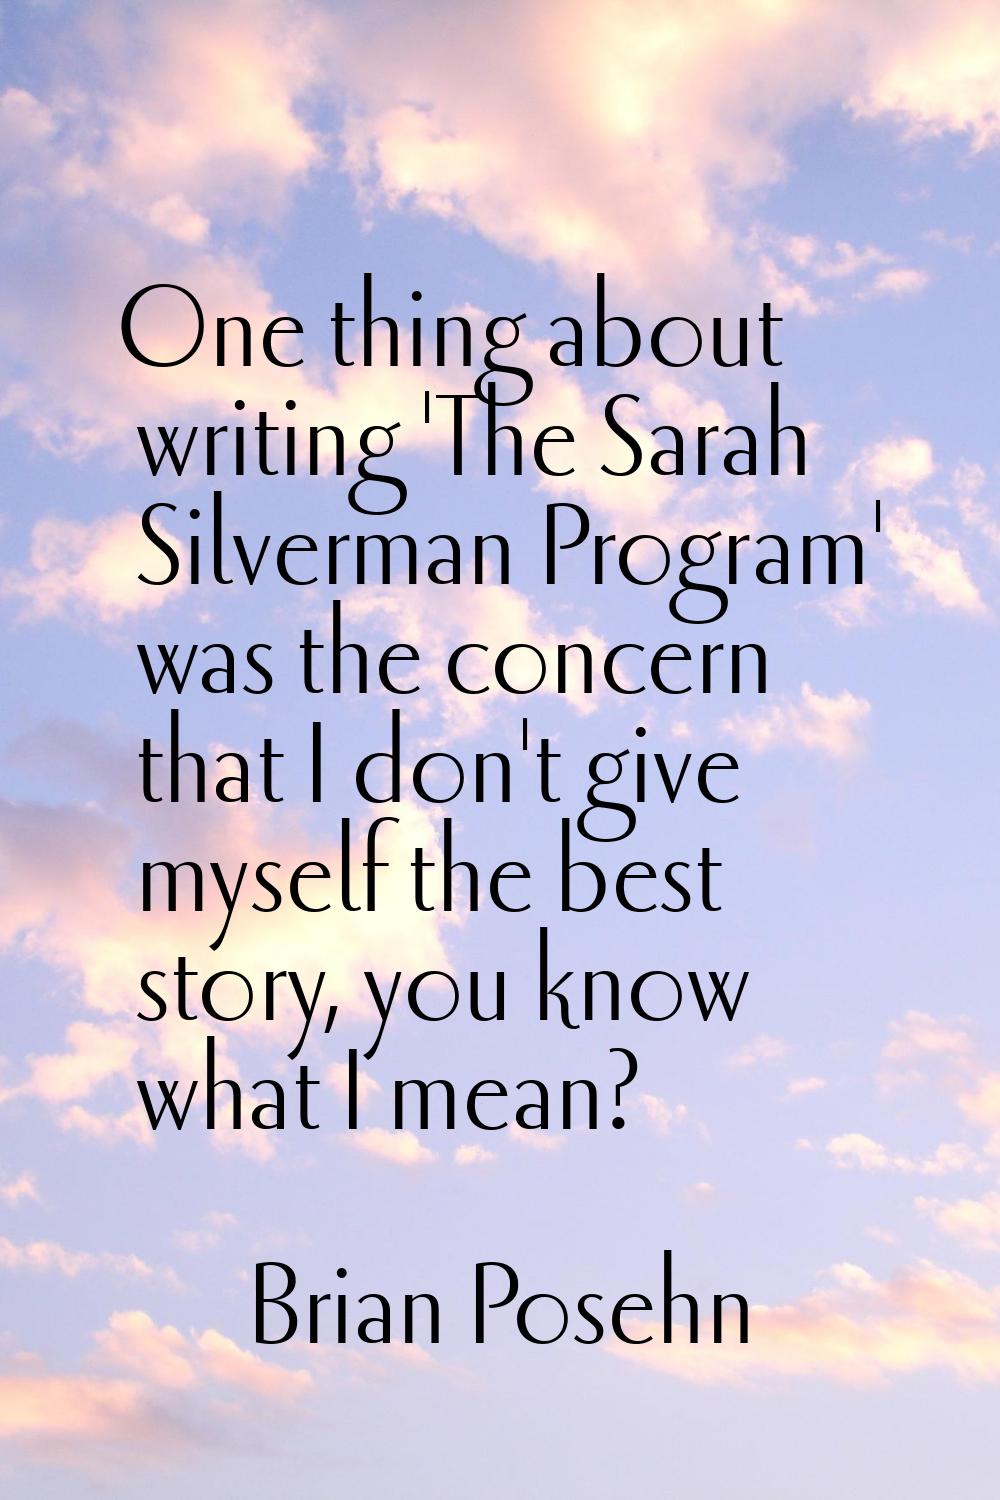 One thing about writing 'The Sarah Silverman Program' was the concern that I don't give myself the 